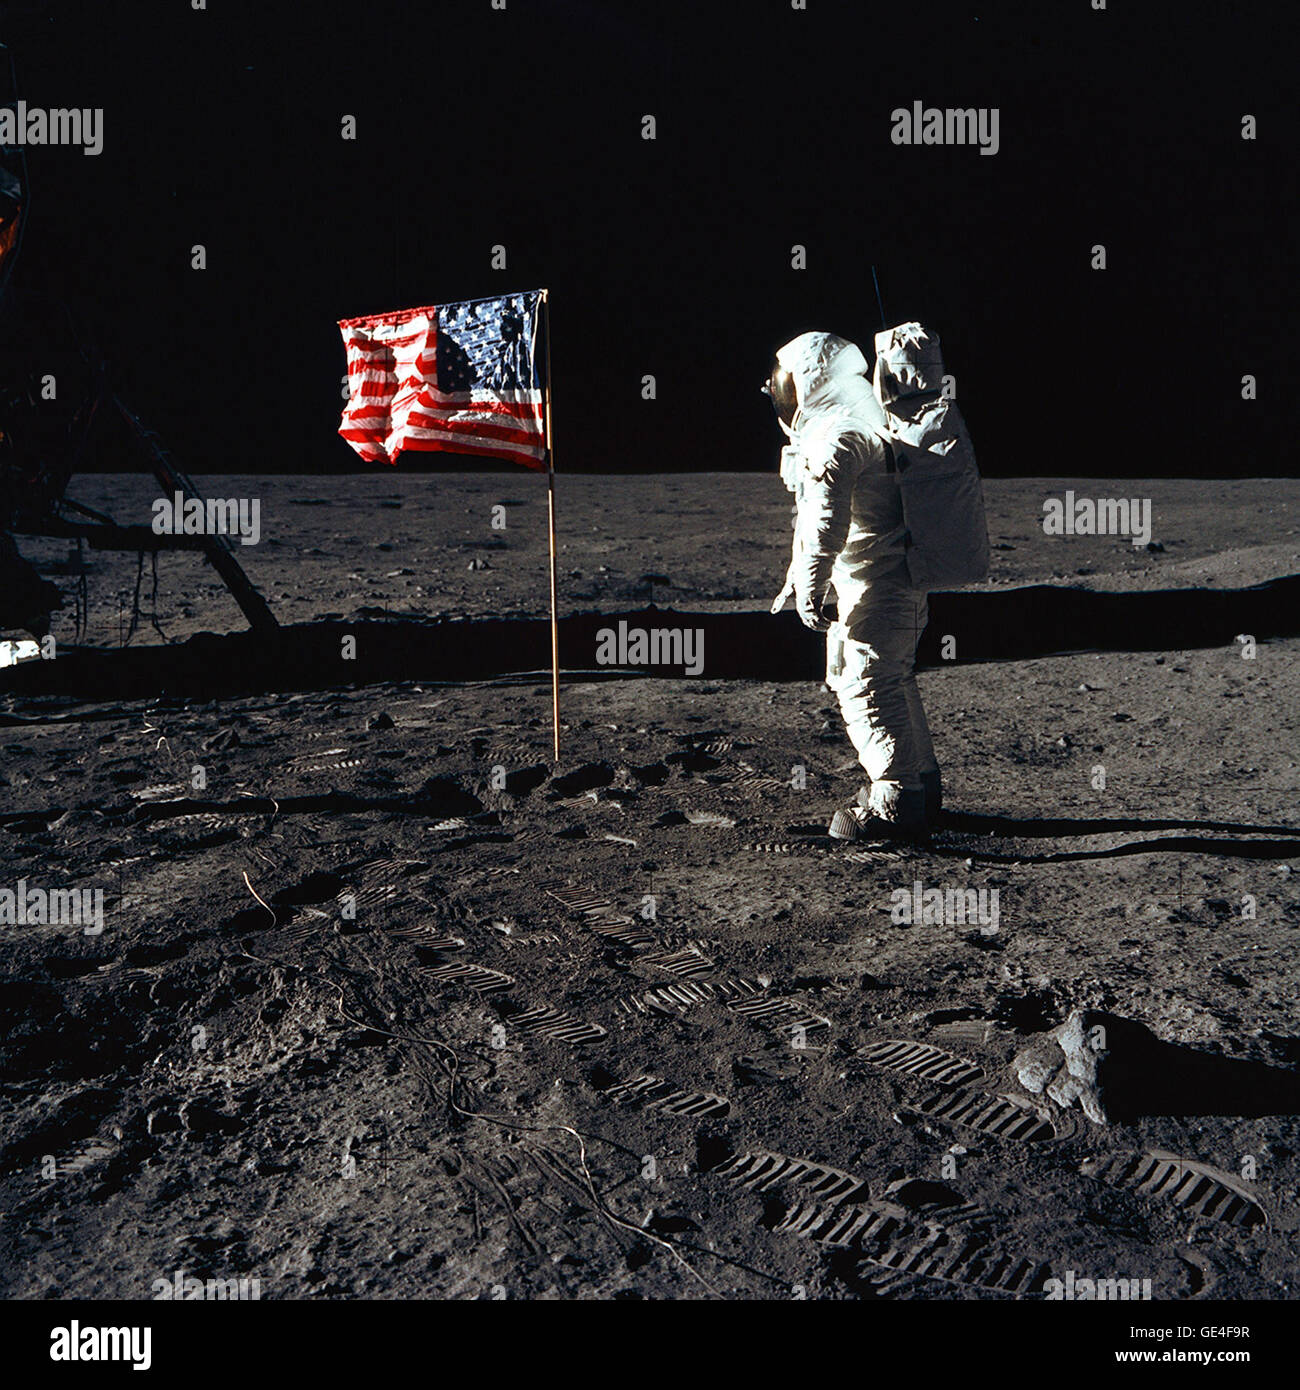 (July 20, 1969) Astronaut Buzz Aldrin, lunar module pilot of the first lunar landing mission, poses for a photograph beside the deployed United States flag during an Apollo 11 Extravehicular Activity (EVA) on the lunar surface. The Lunar Module (LM) is on the left, and the footprints of the astronauts are clearly visible in the soil of the Moon. Astronaut Neil A. Armstrong, commander, took this picture with a 70mm Hasselblad lunar surface camera. While astronauts Armstrong and Aldrin descended in the LM, the &quot;Eagle&quot;, to explore the Sea of Tranquility region of the Moon, astronaut Mic Stock Photo